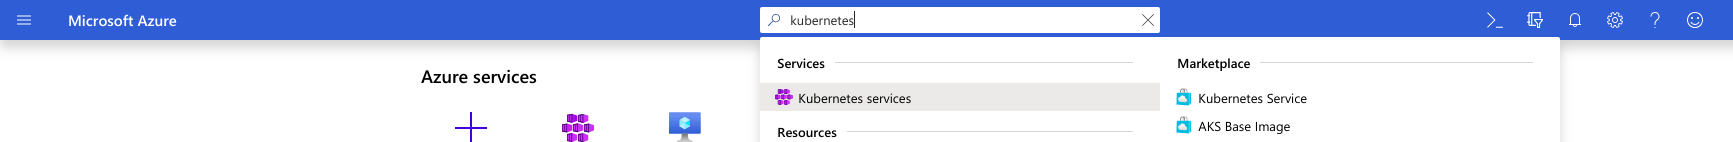 Finding Kubernetes services in Microsoft Azure